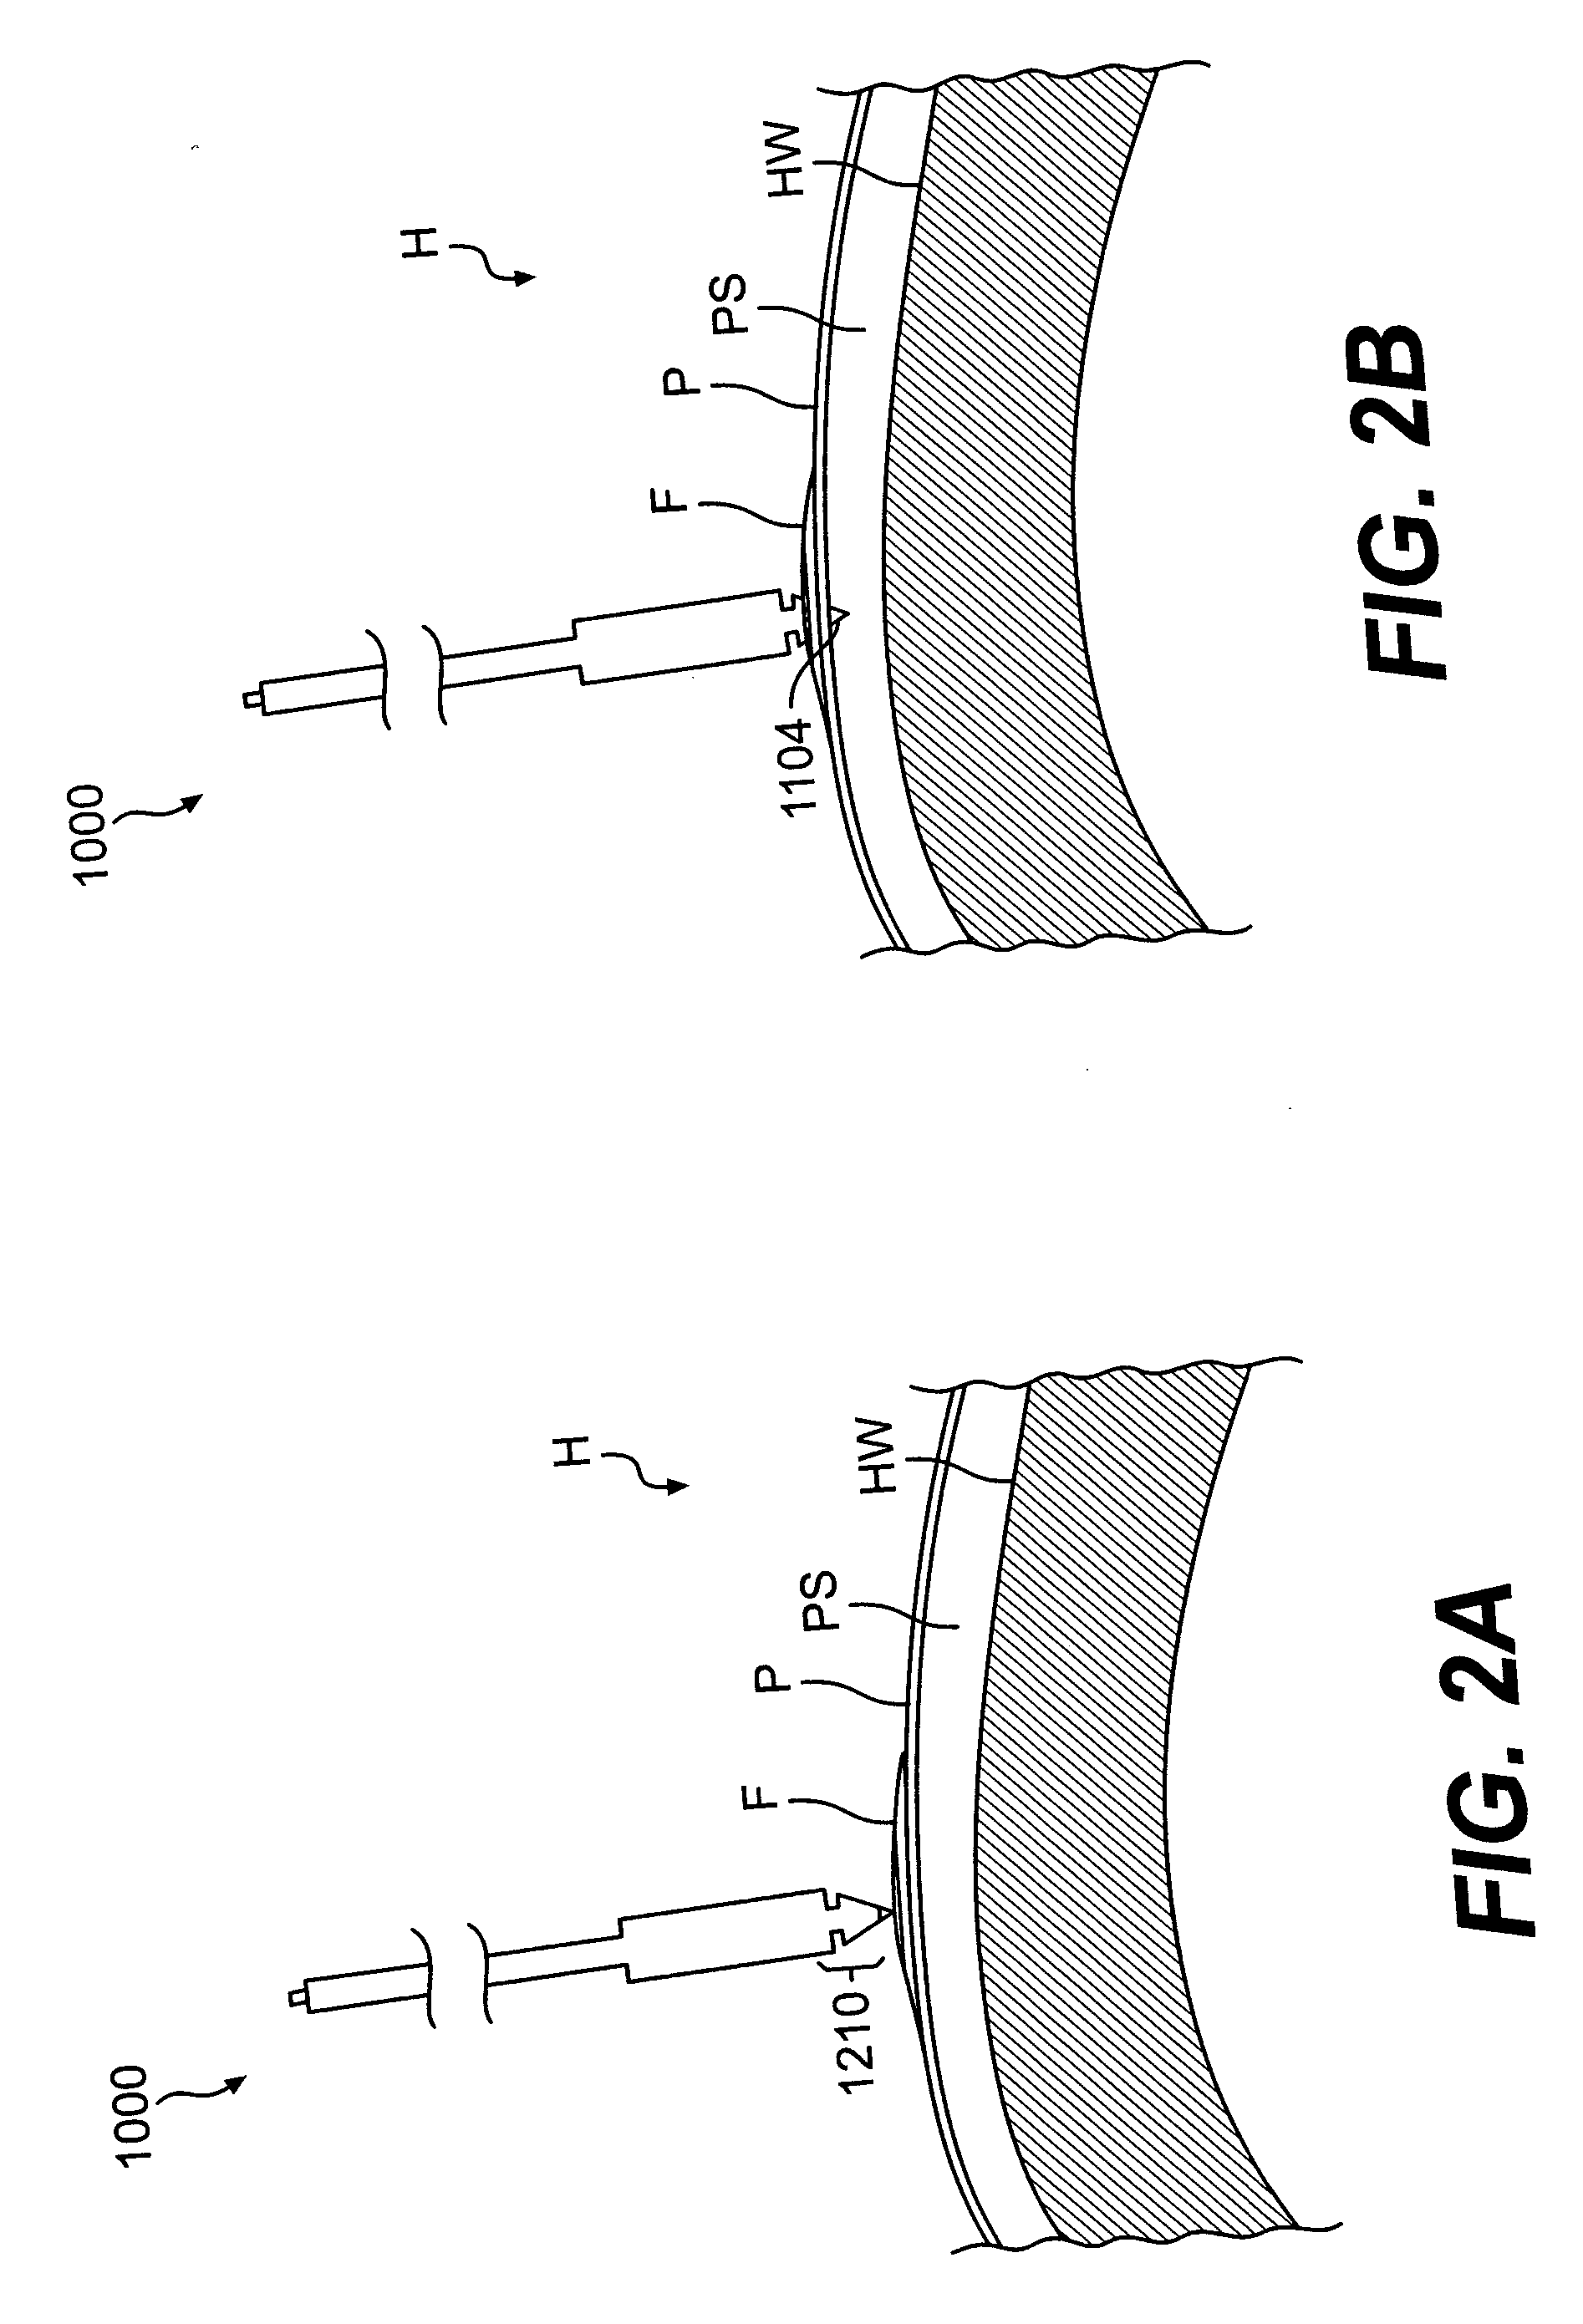 Devices and methods for pericardial access